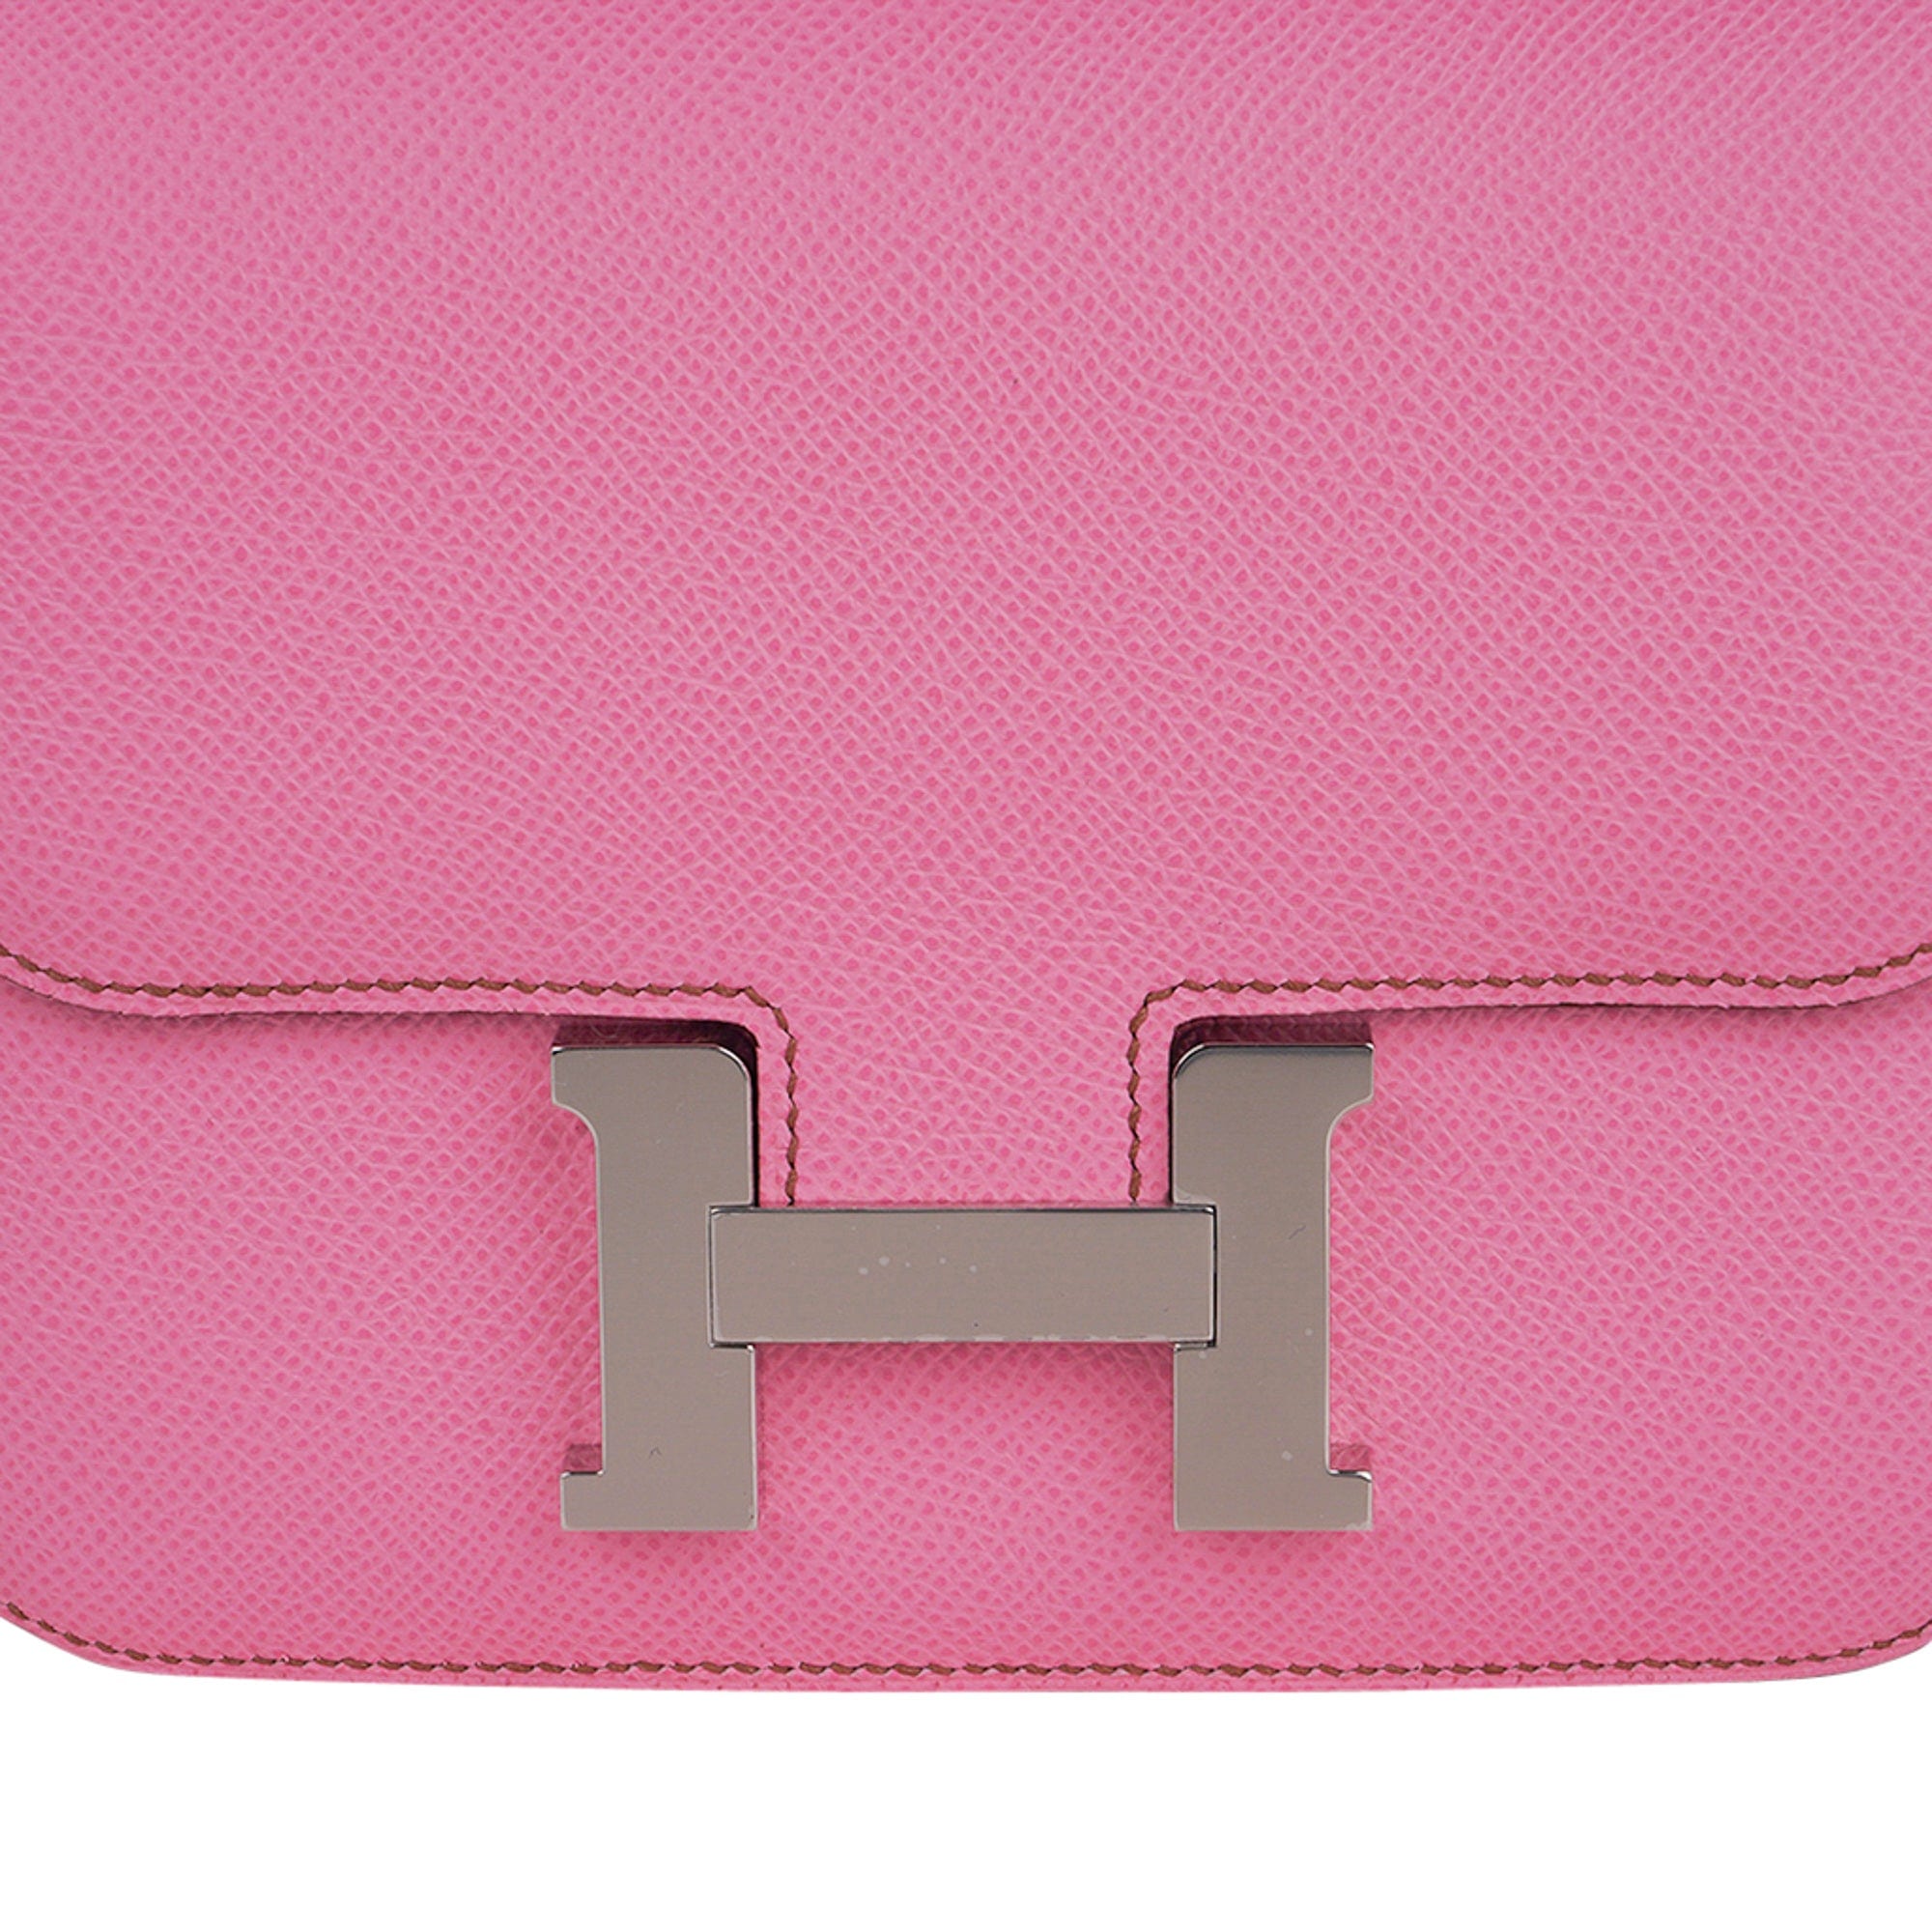 Hermes Constance Cartable Rouge H Limited Edition Bag Sombrero Leather